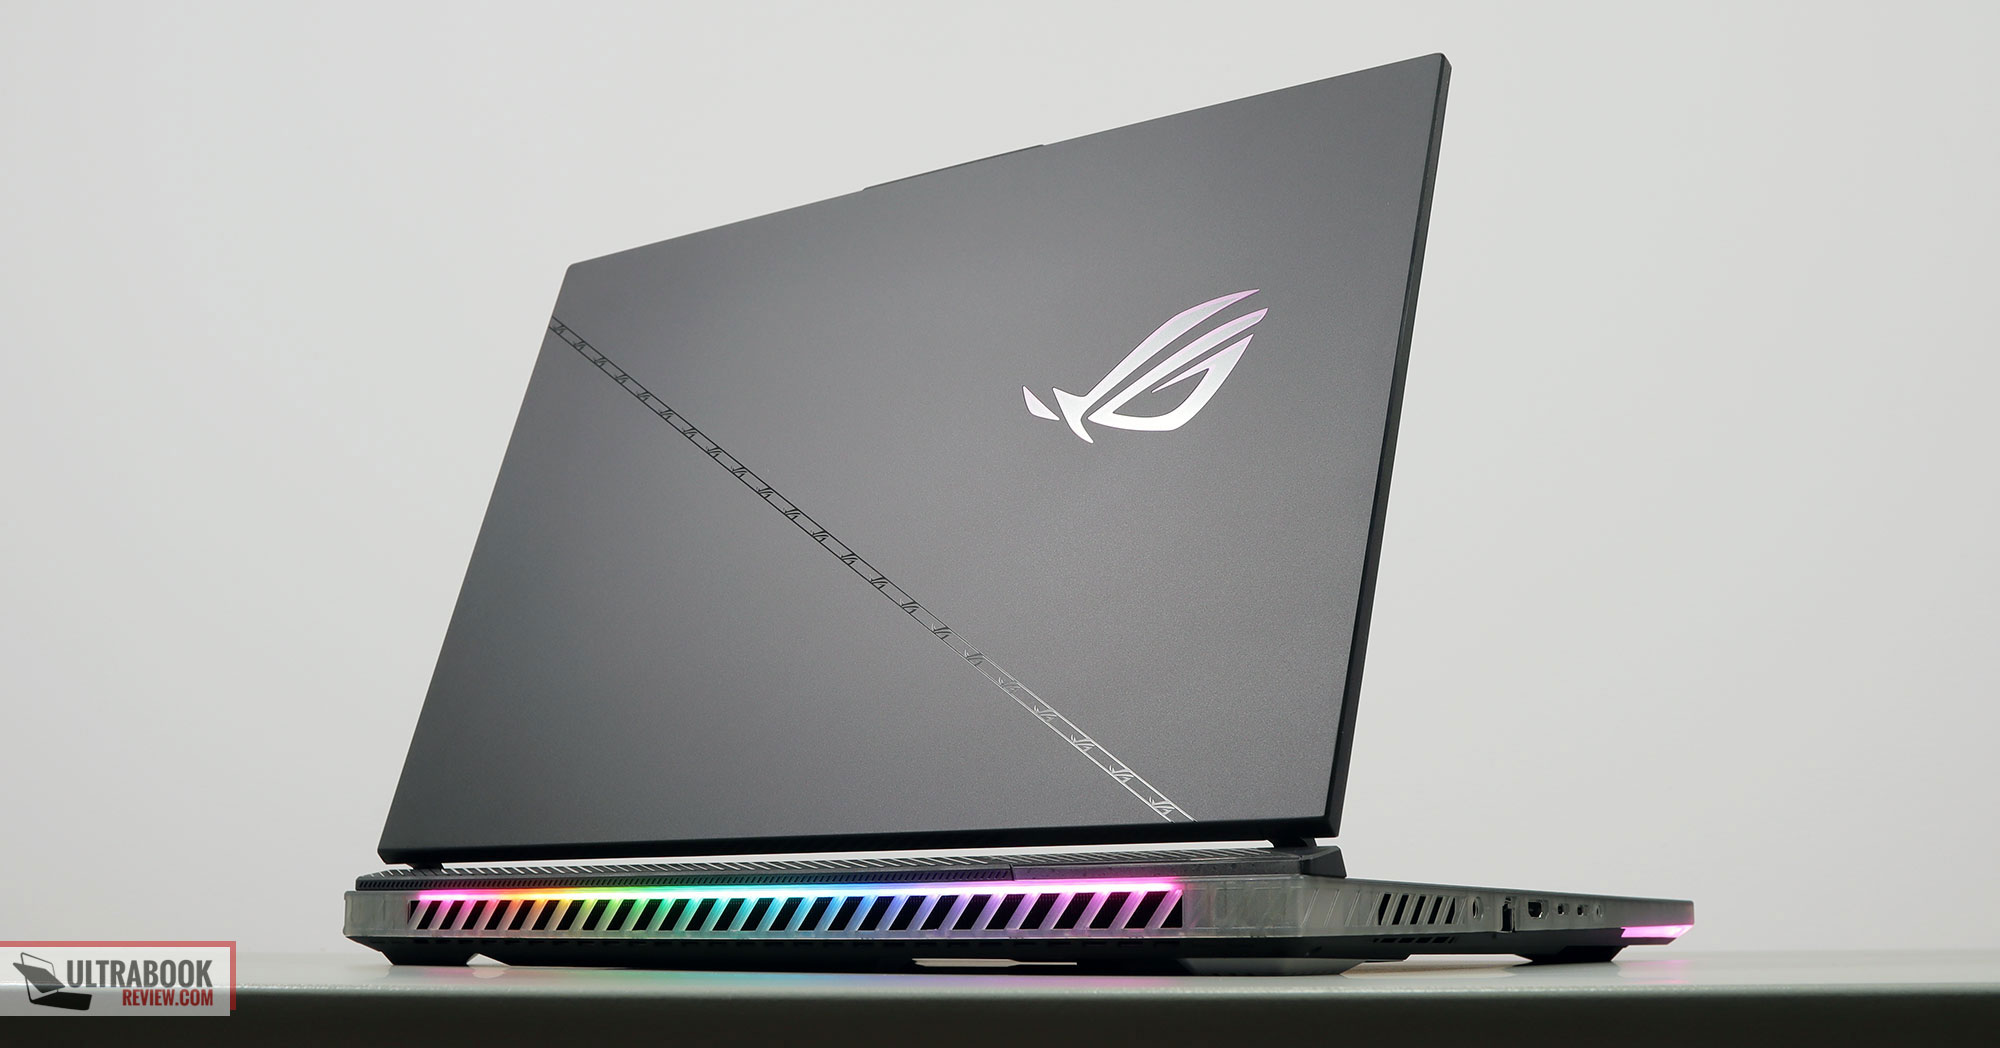 Asus ROG Strix Scar 18 review: the most powerful we've tested so